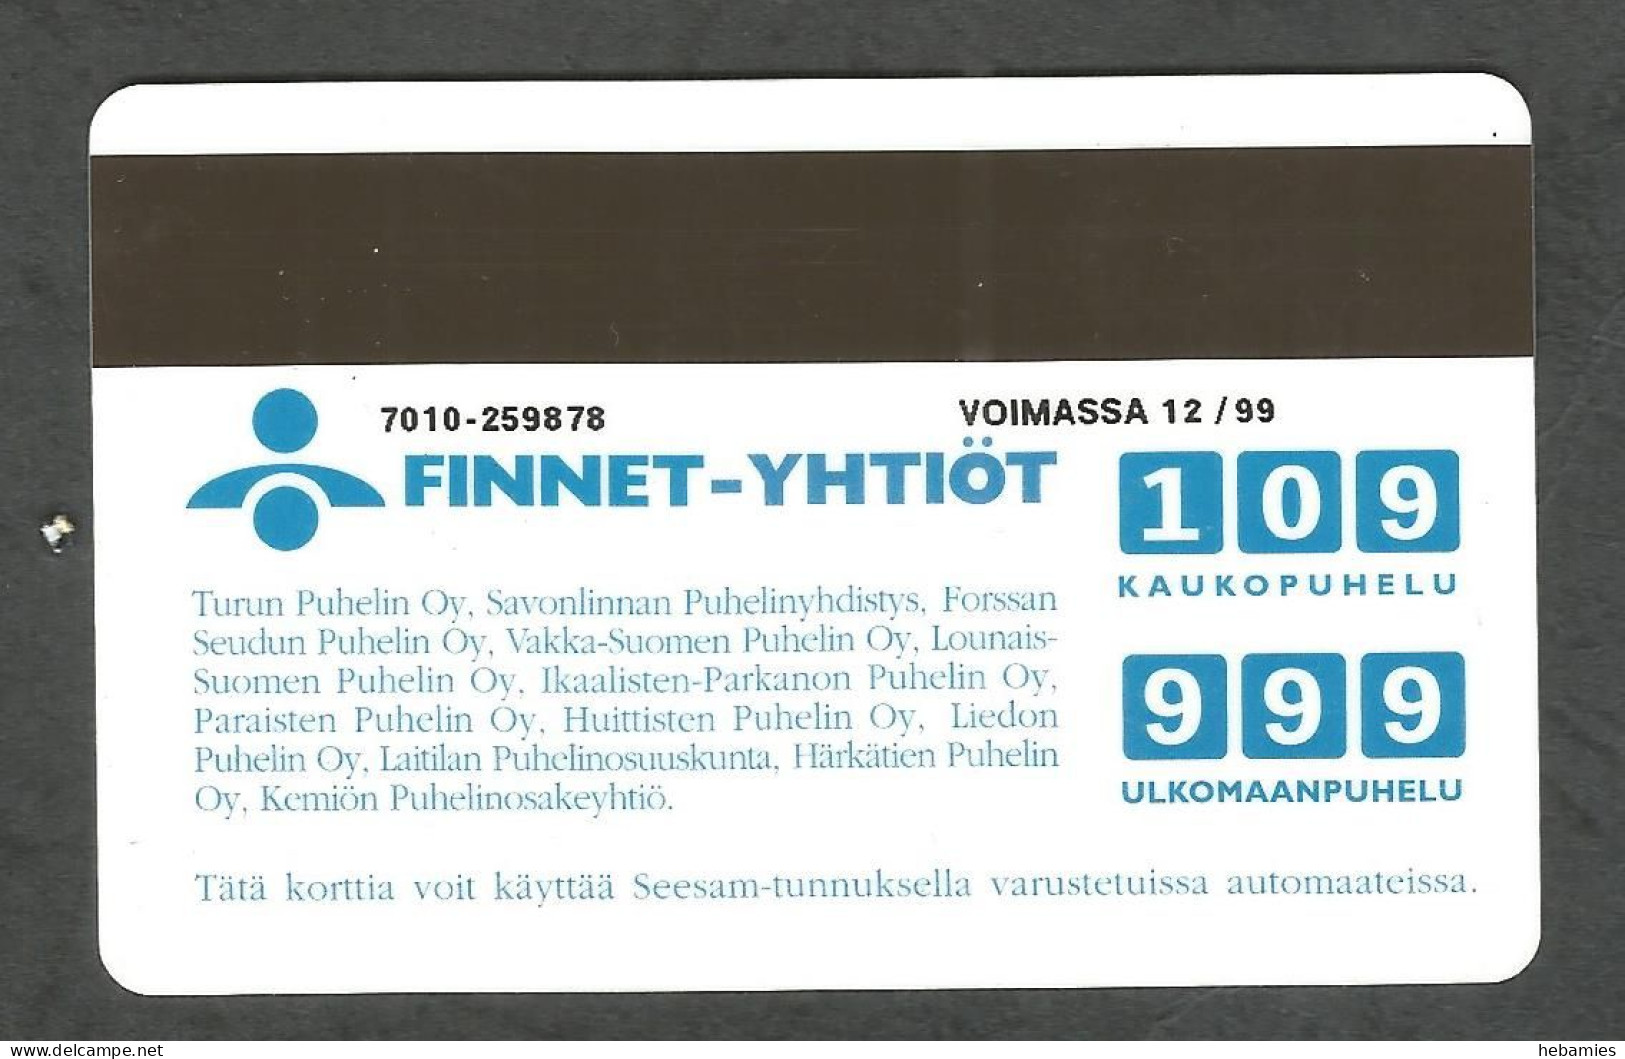 REEF KNOT - 10 FIM  1998  - Magnetic Card - D354 - FINLAND - - Barcos